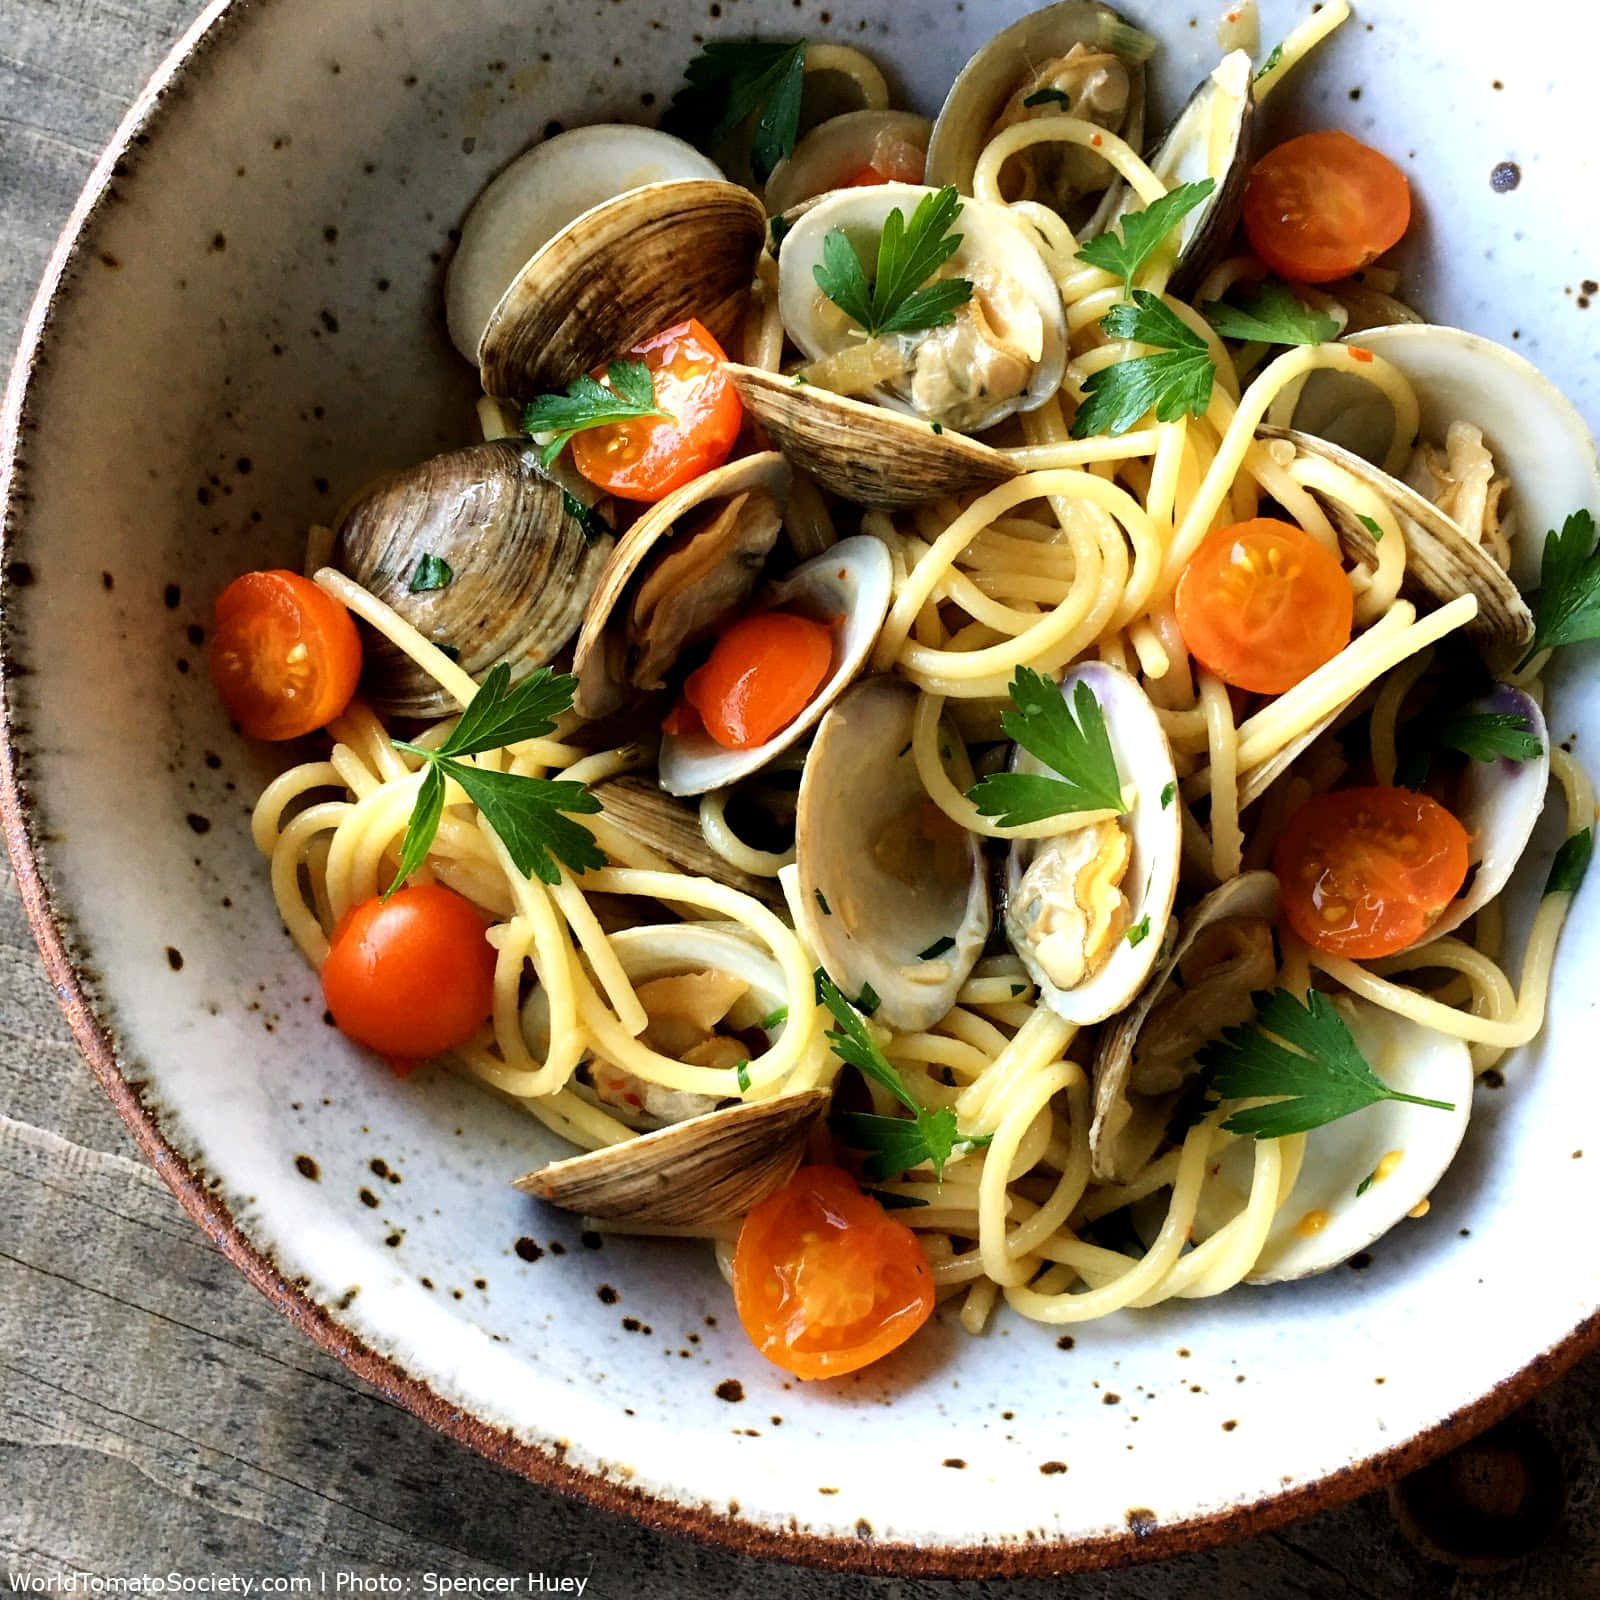 Enjoy the rich blend of fresh ingredients in our Spaghetti Alla Vongole with Cherry Tomatoes. Wallpaper